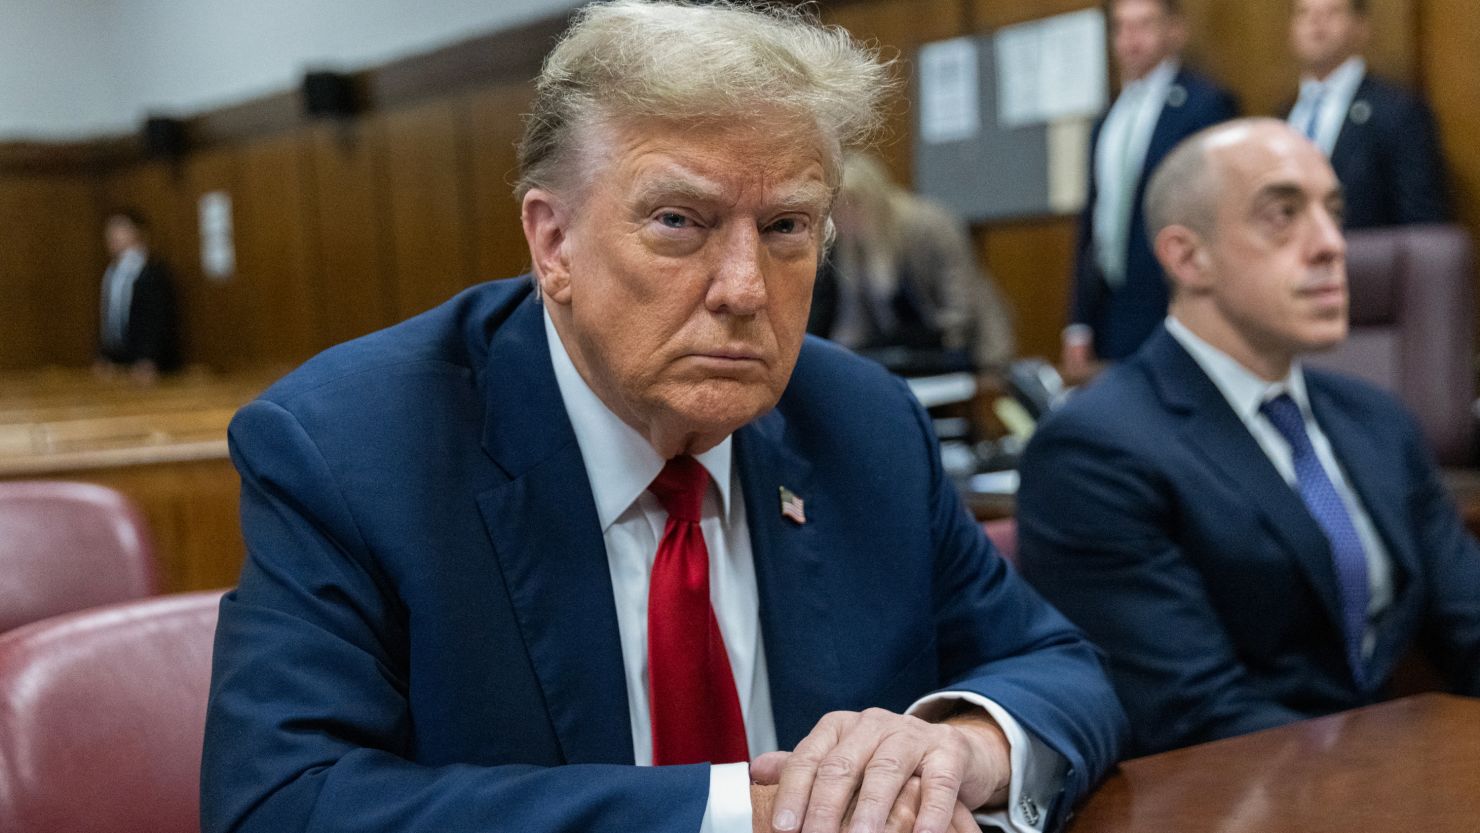 Former US President Donald Trump attends the first day of his trial for allegedly covering up hush money payments linked to extramarital affairs, at Manhattan Criminal Court in New York City on April 15, 2024.